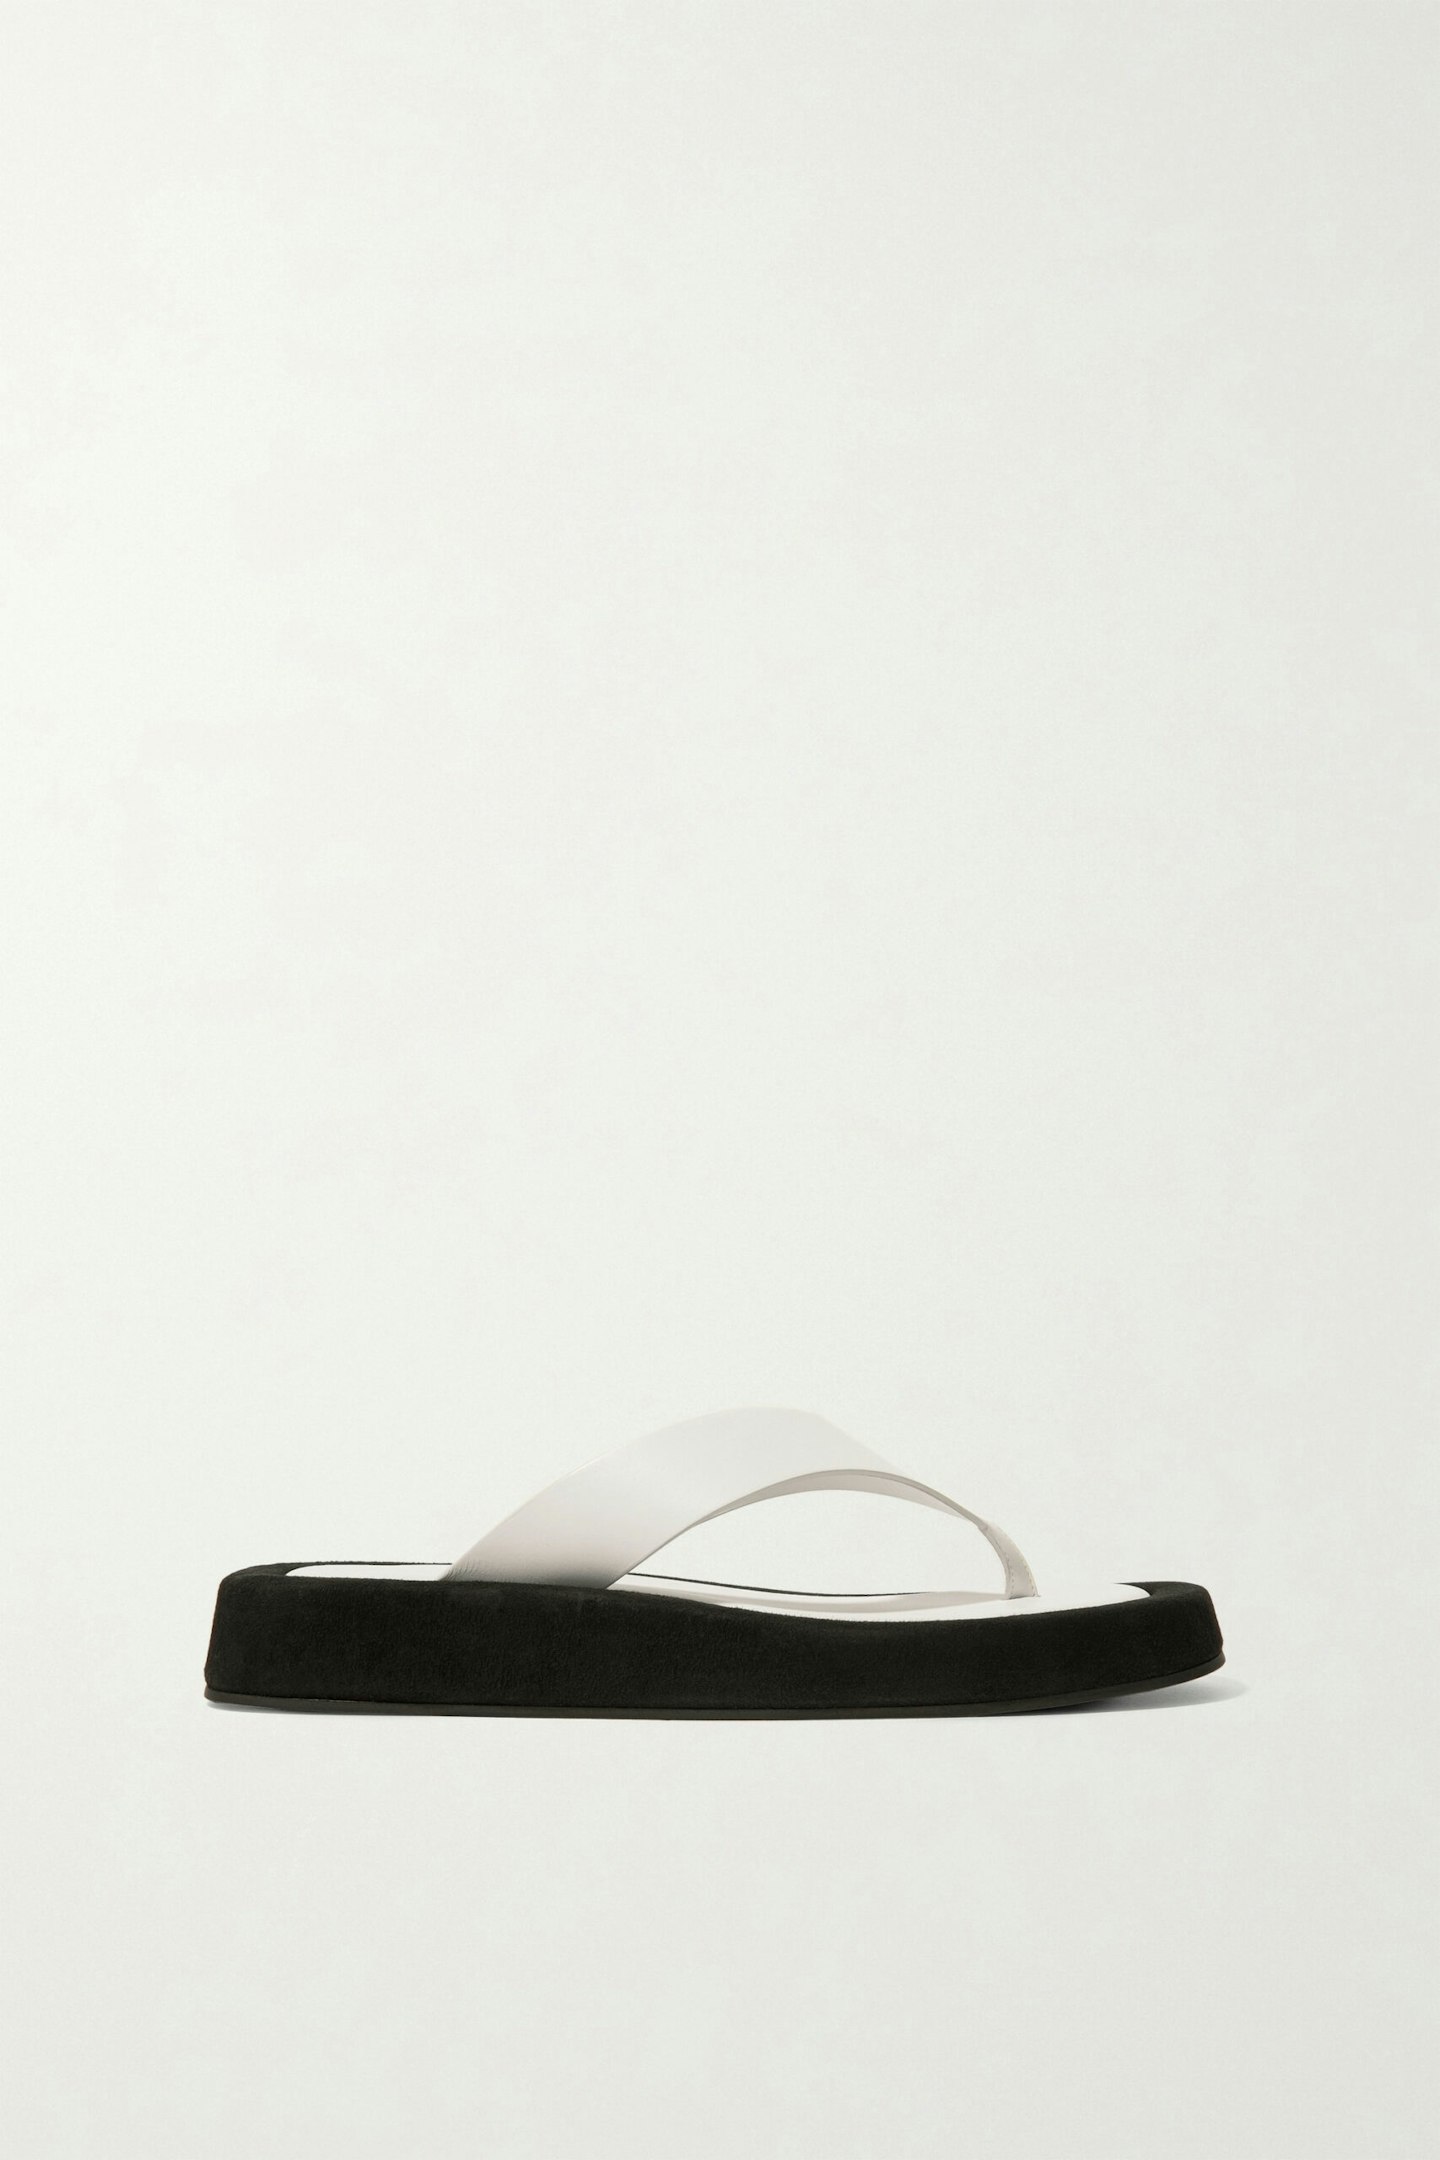 The Row, Ginza Two-Tone Leather And Suede Platform Flip-Flops